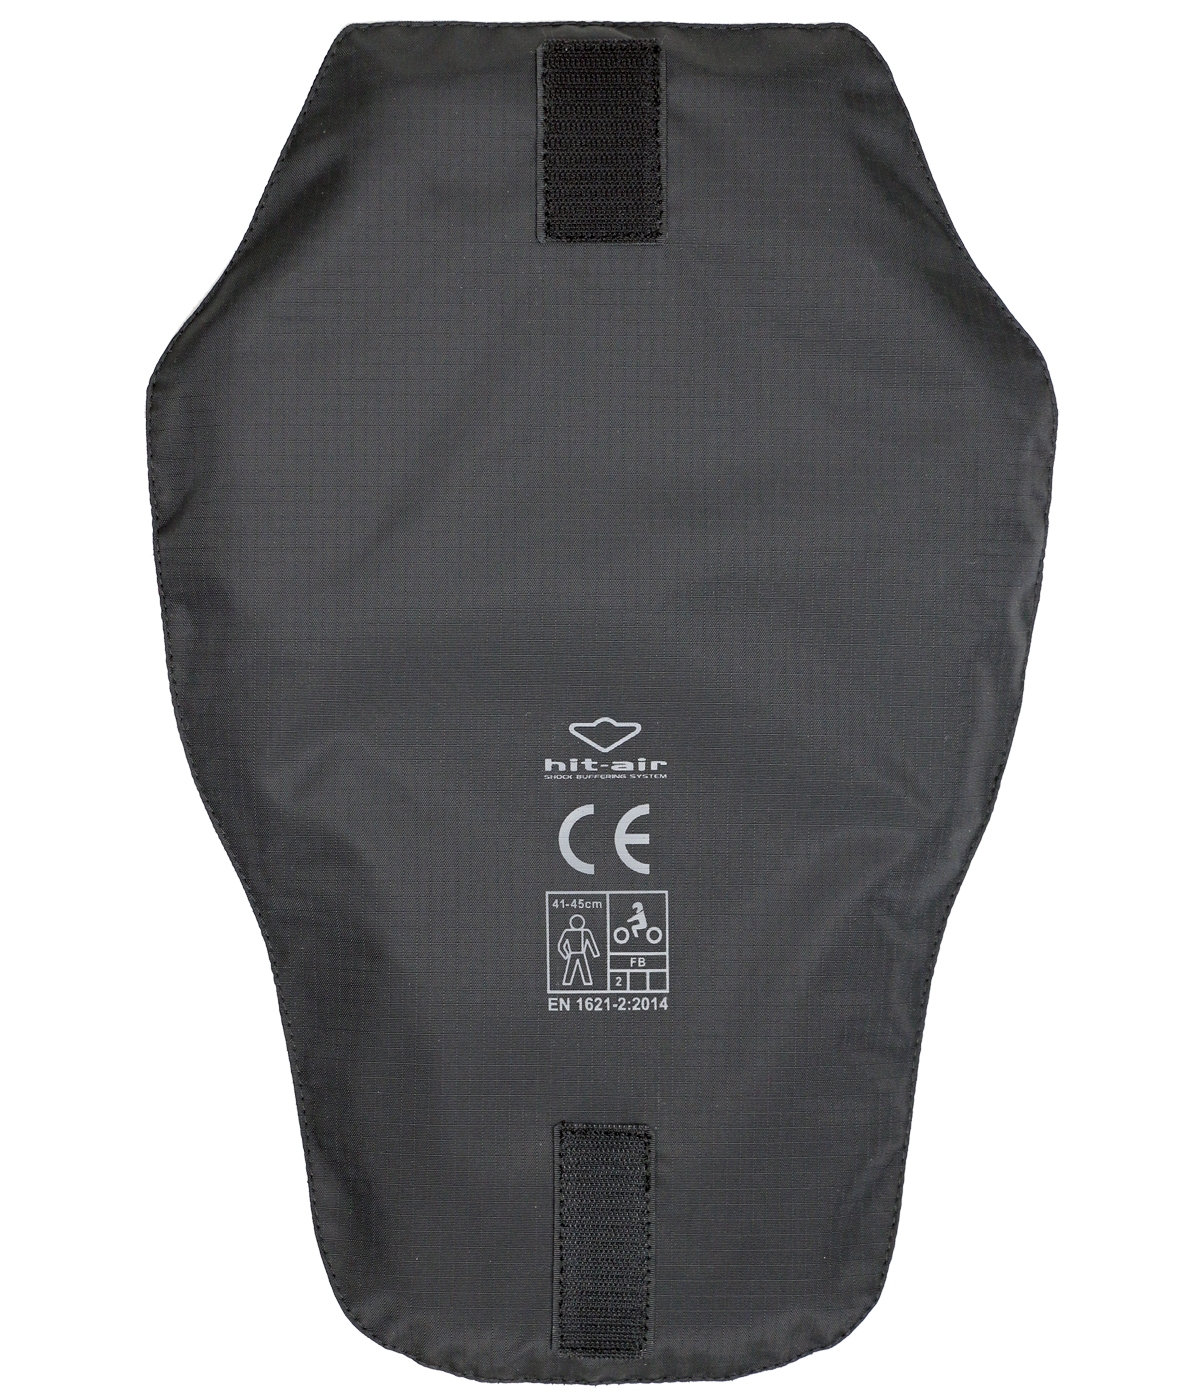 CE Back padding YM with Velcro Cover, Back Protector (velcro), motorcycle, - hit-air - Werable Airbag